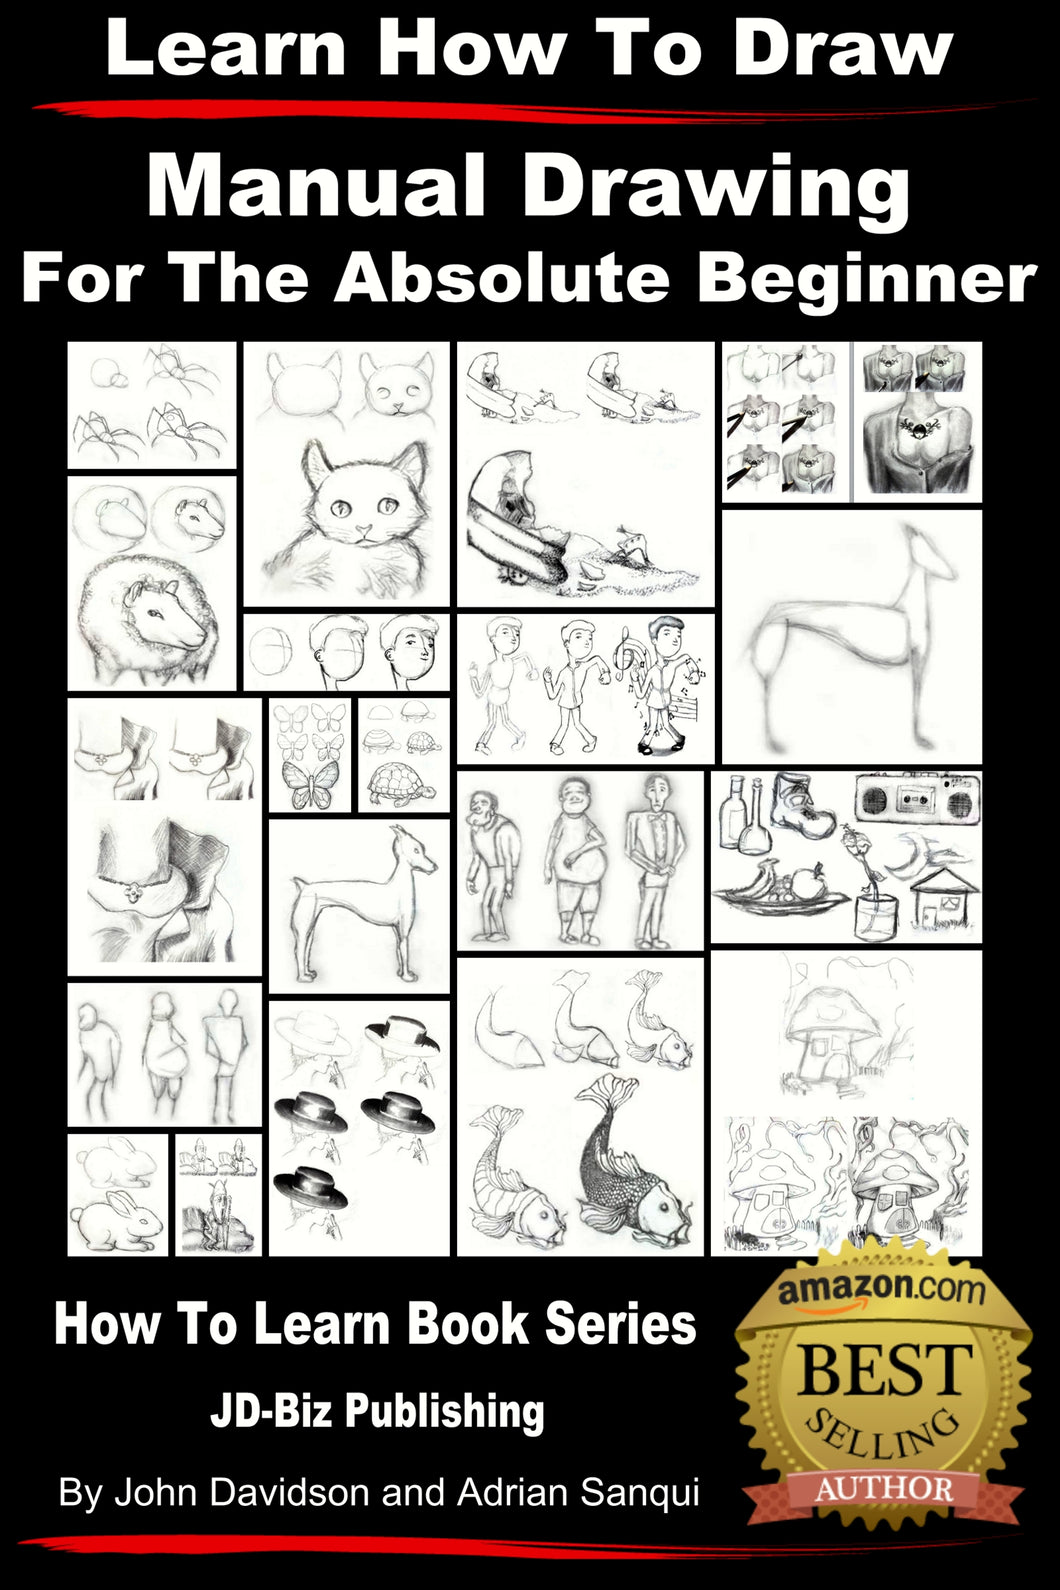 Learn How to Draw Manual Drawing For the Absolute Beginner Learn to